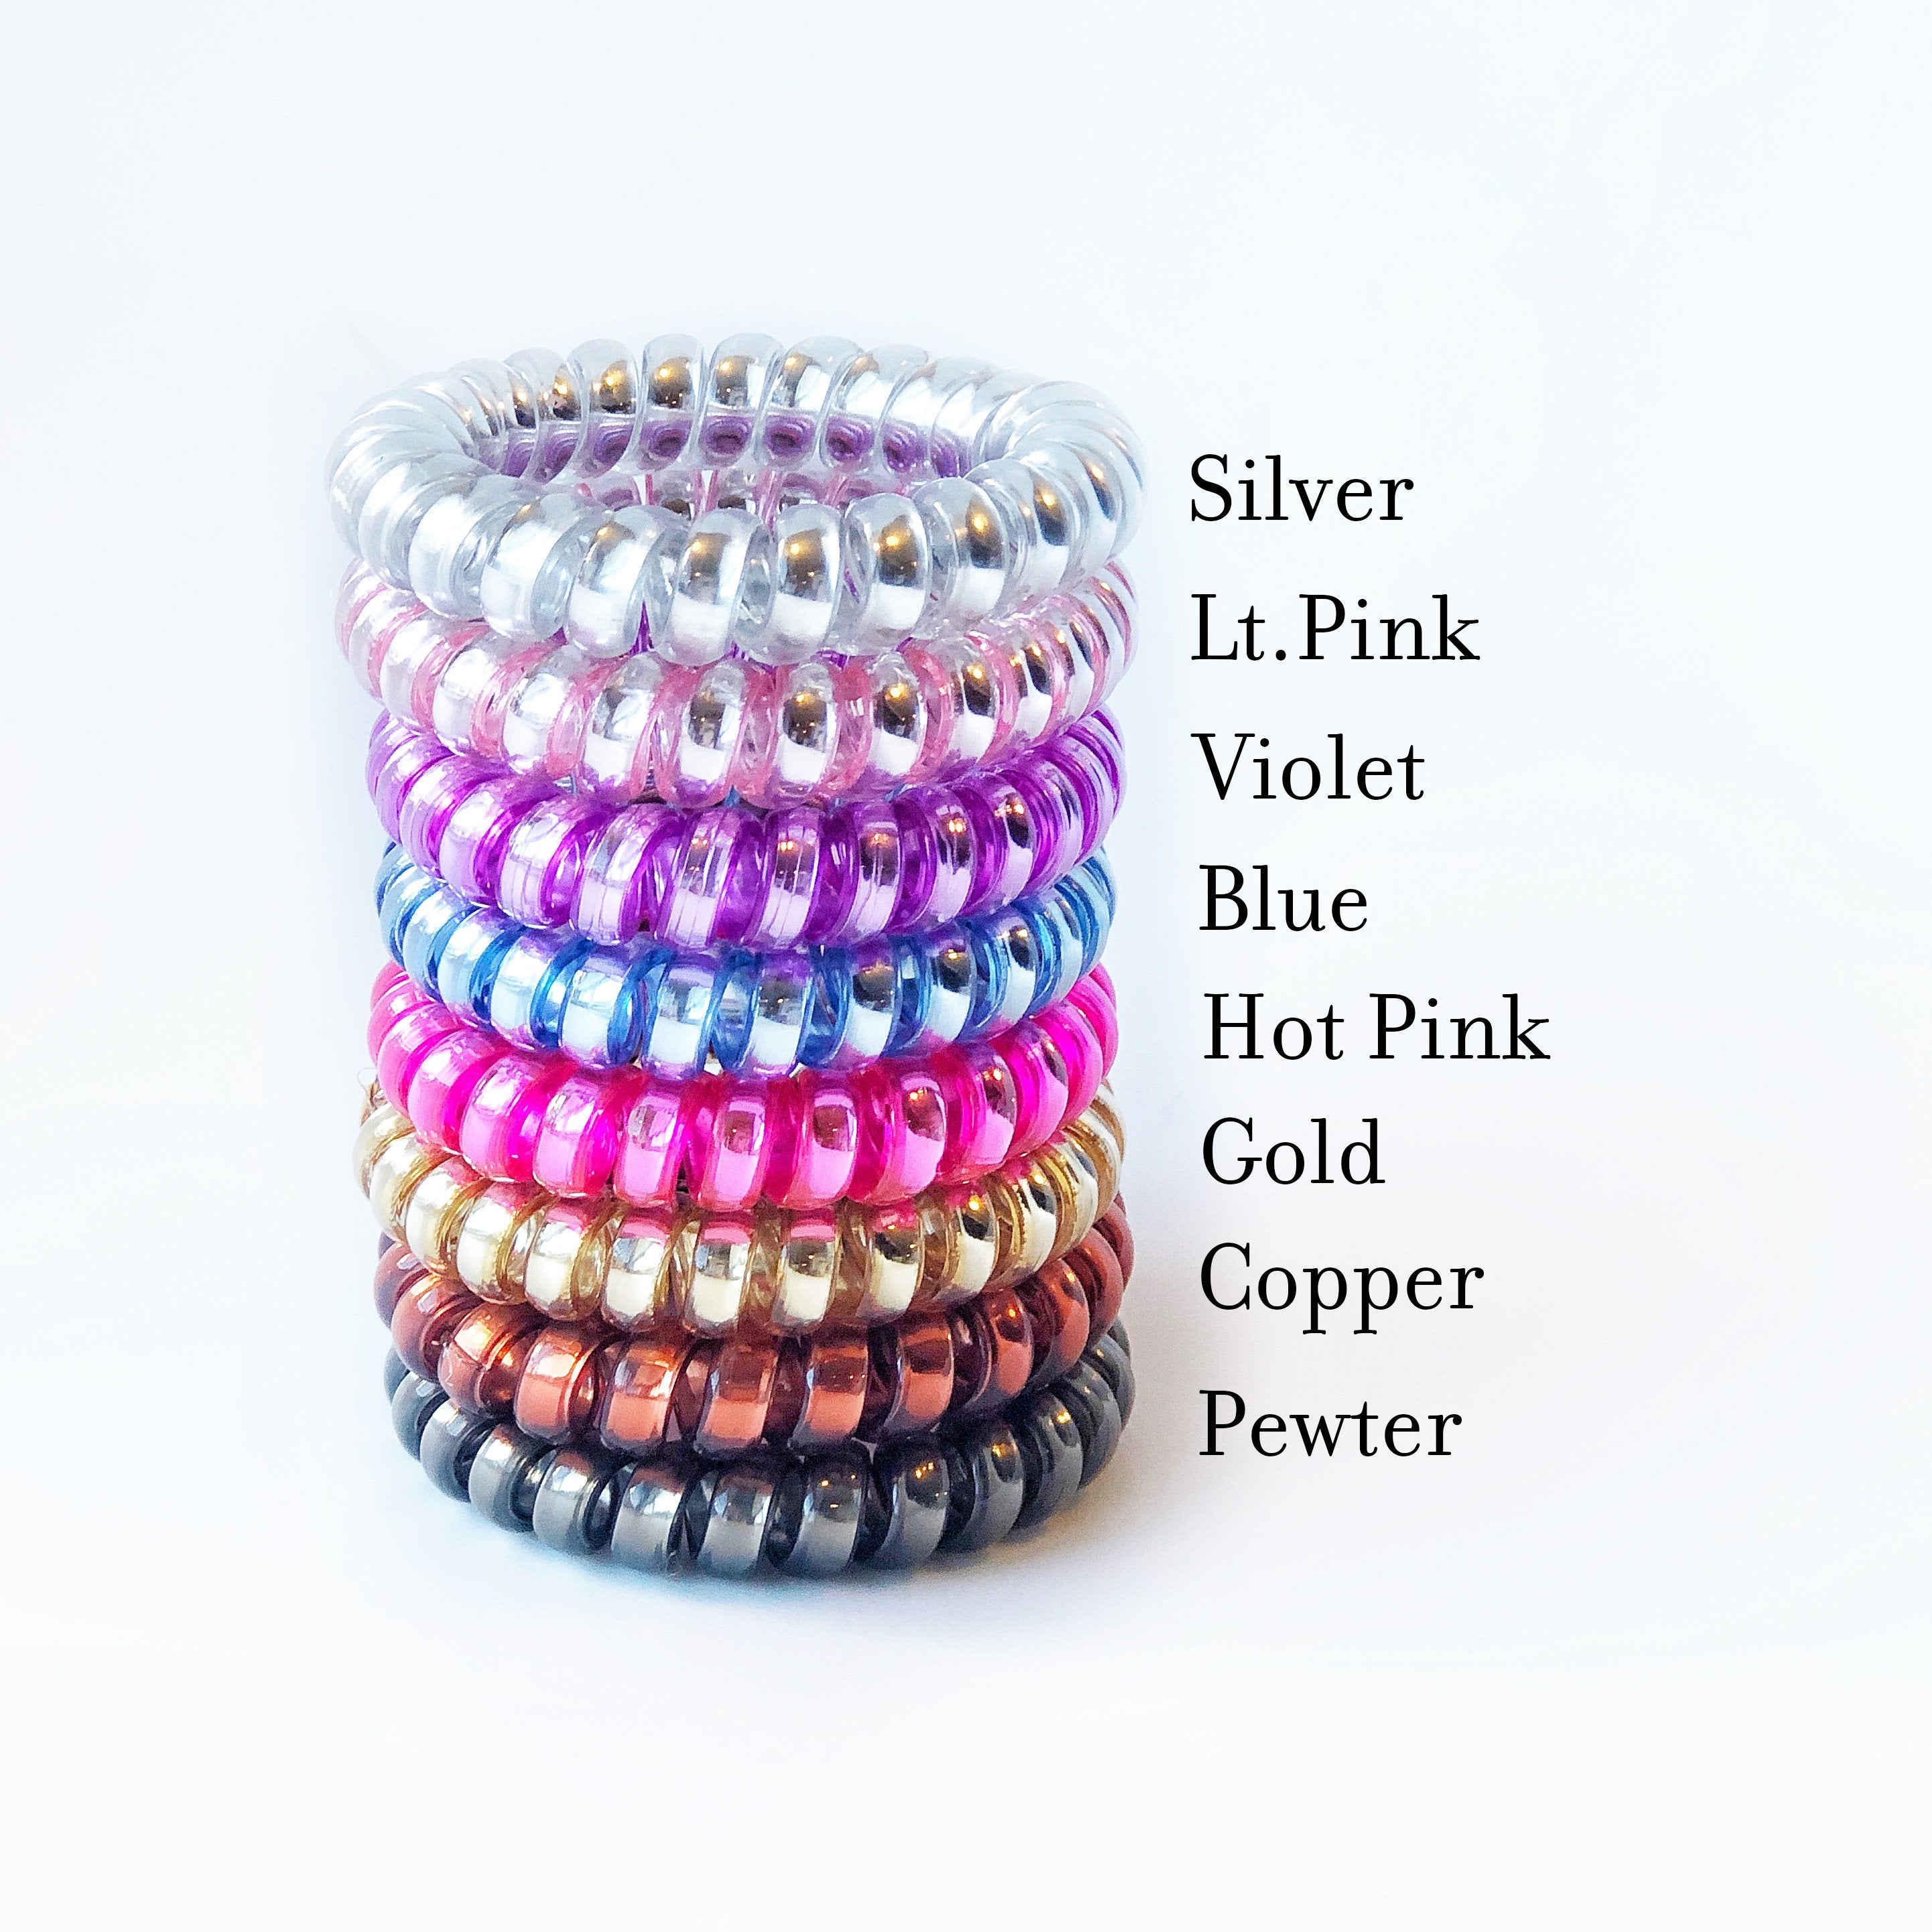 One Wild Year Birthday Party Favors, Spiral Hair Ties, 1st Birthday Favors - @PlumPolkaDot 